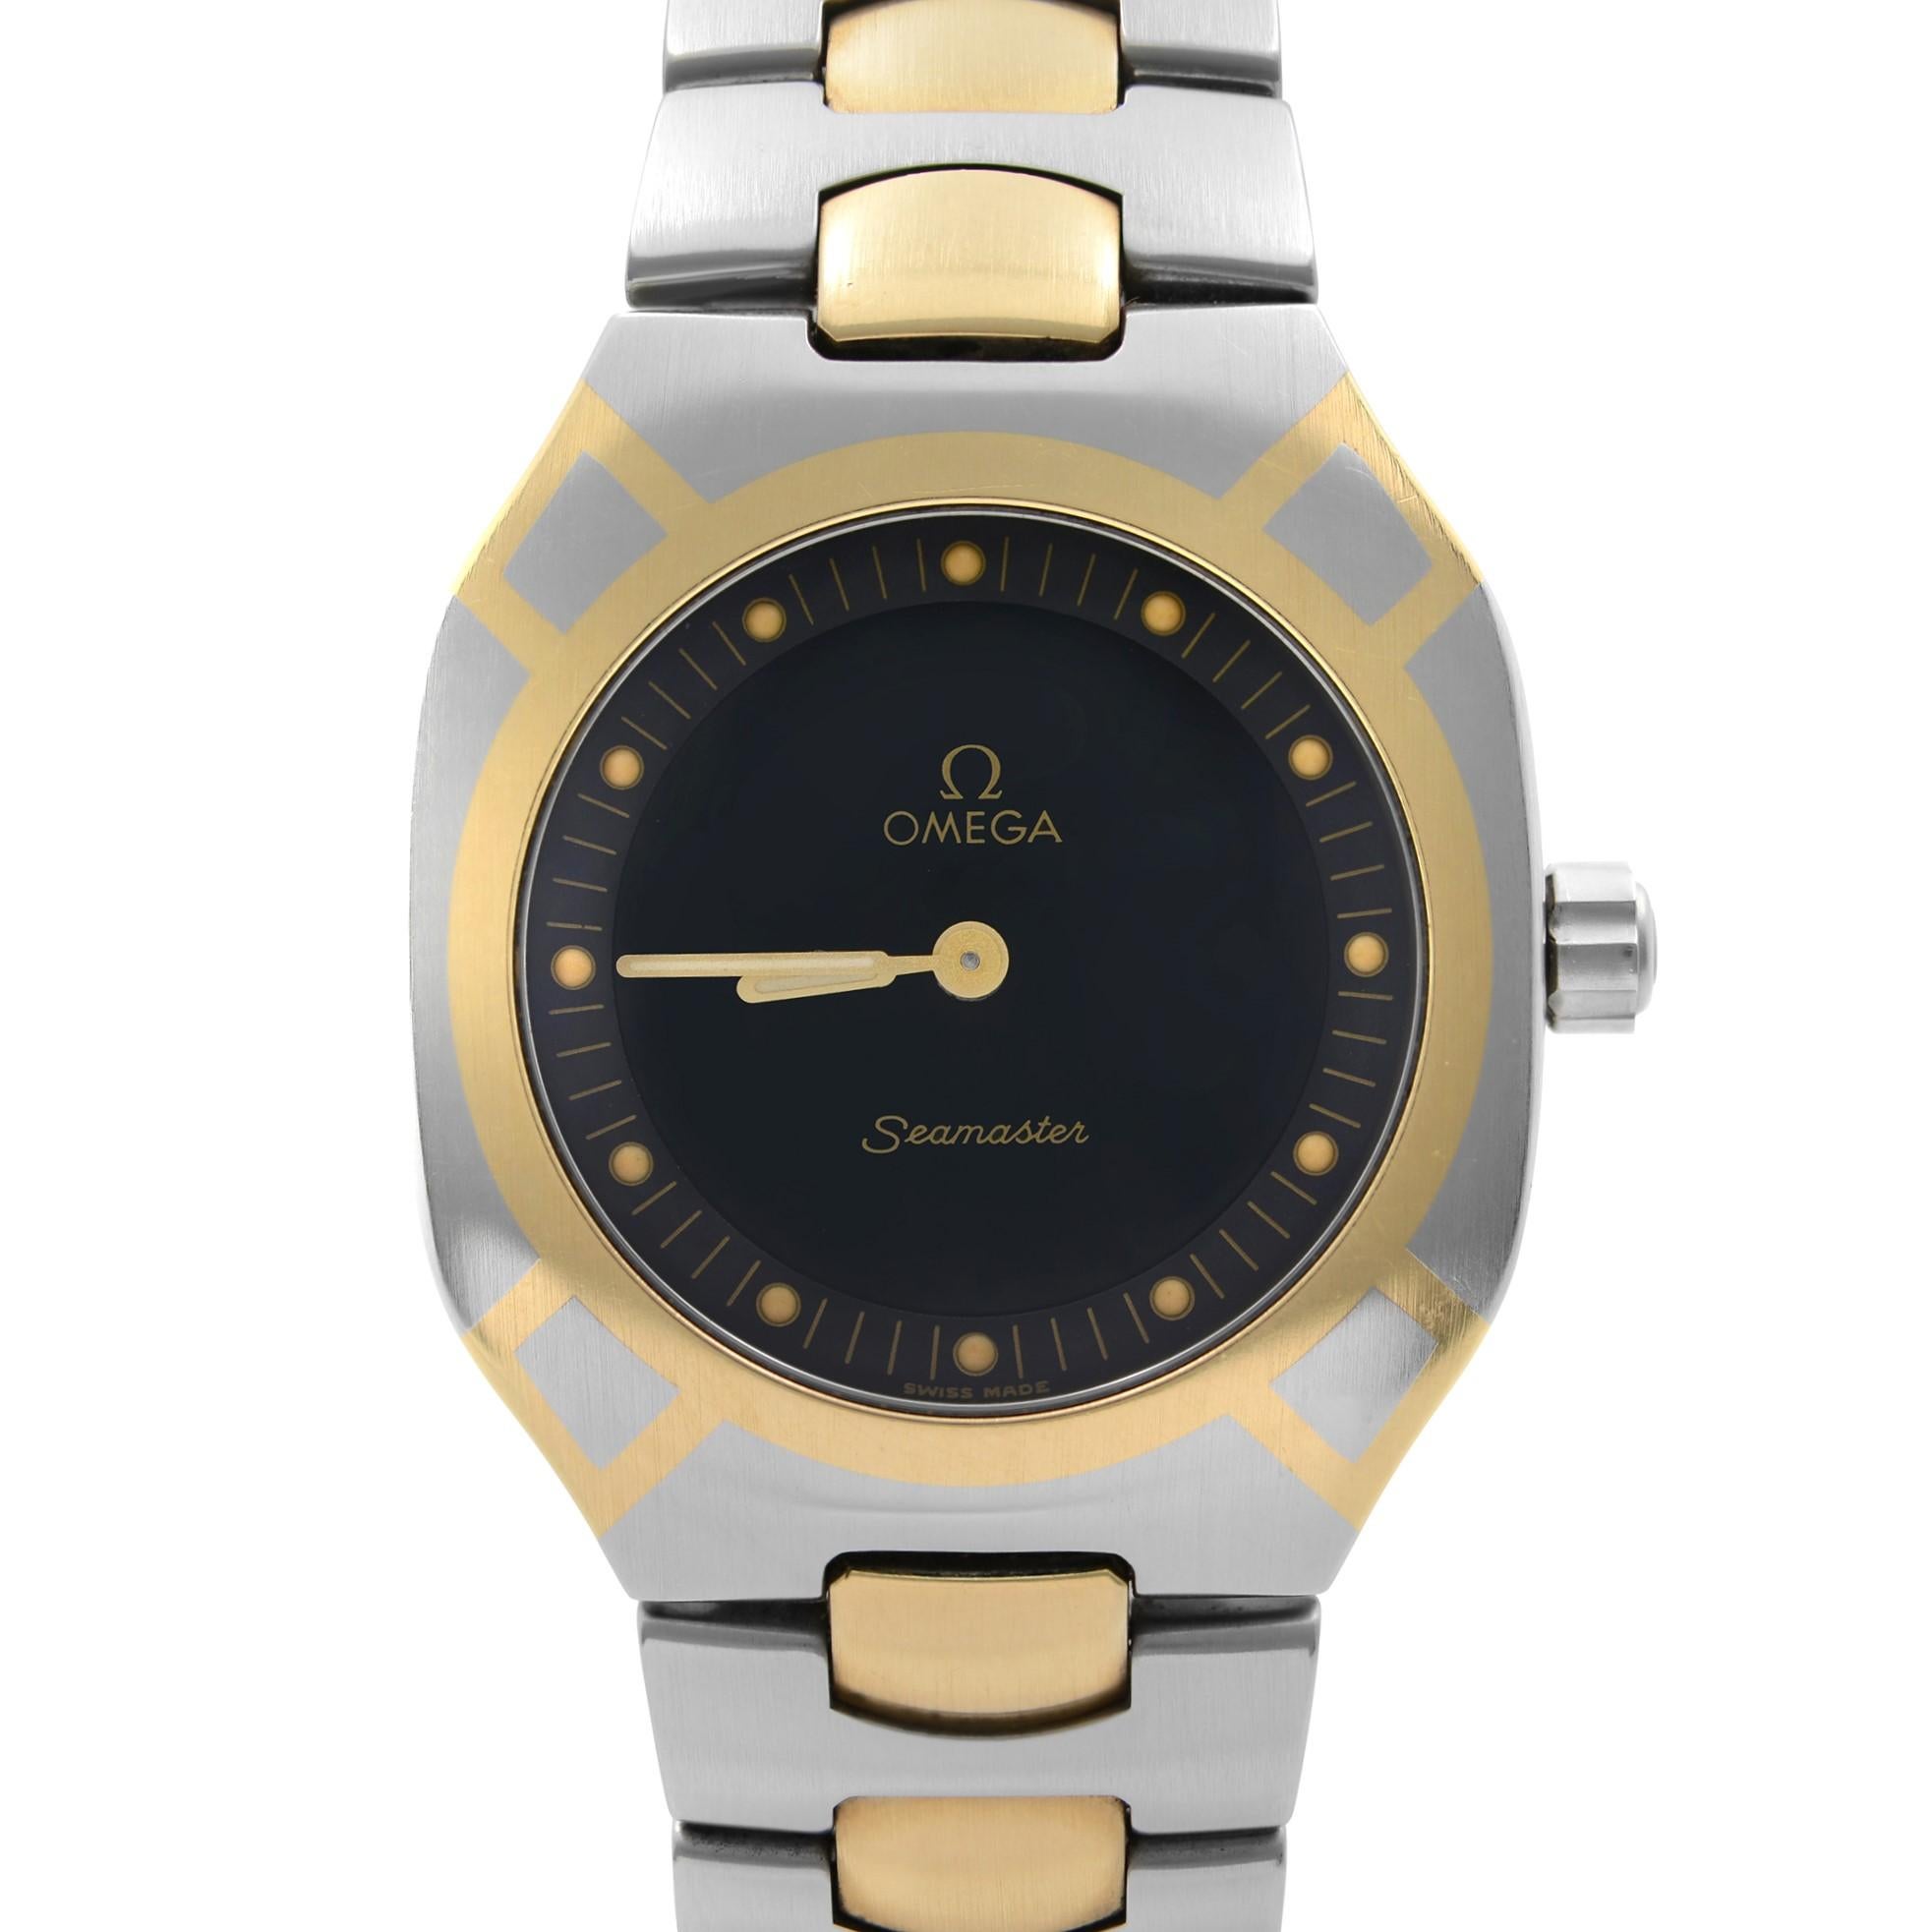 Vintage Pre-owned Omega Seamaster Polaris Two-Tone Steel Black Dial Quartz Unisex Watch 2440.50.00. It Was Produced in 1988. 18k gold plated mid links and 18k gold in case. Analog and Digital Display Dial. The Watch Bracelet and Case Show Minor